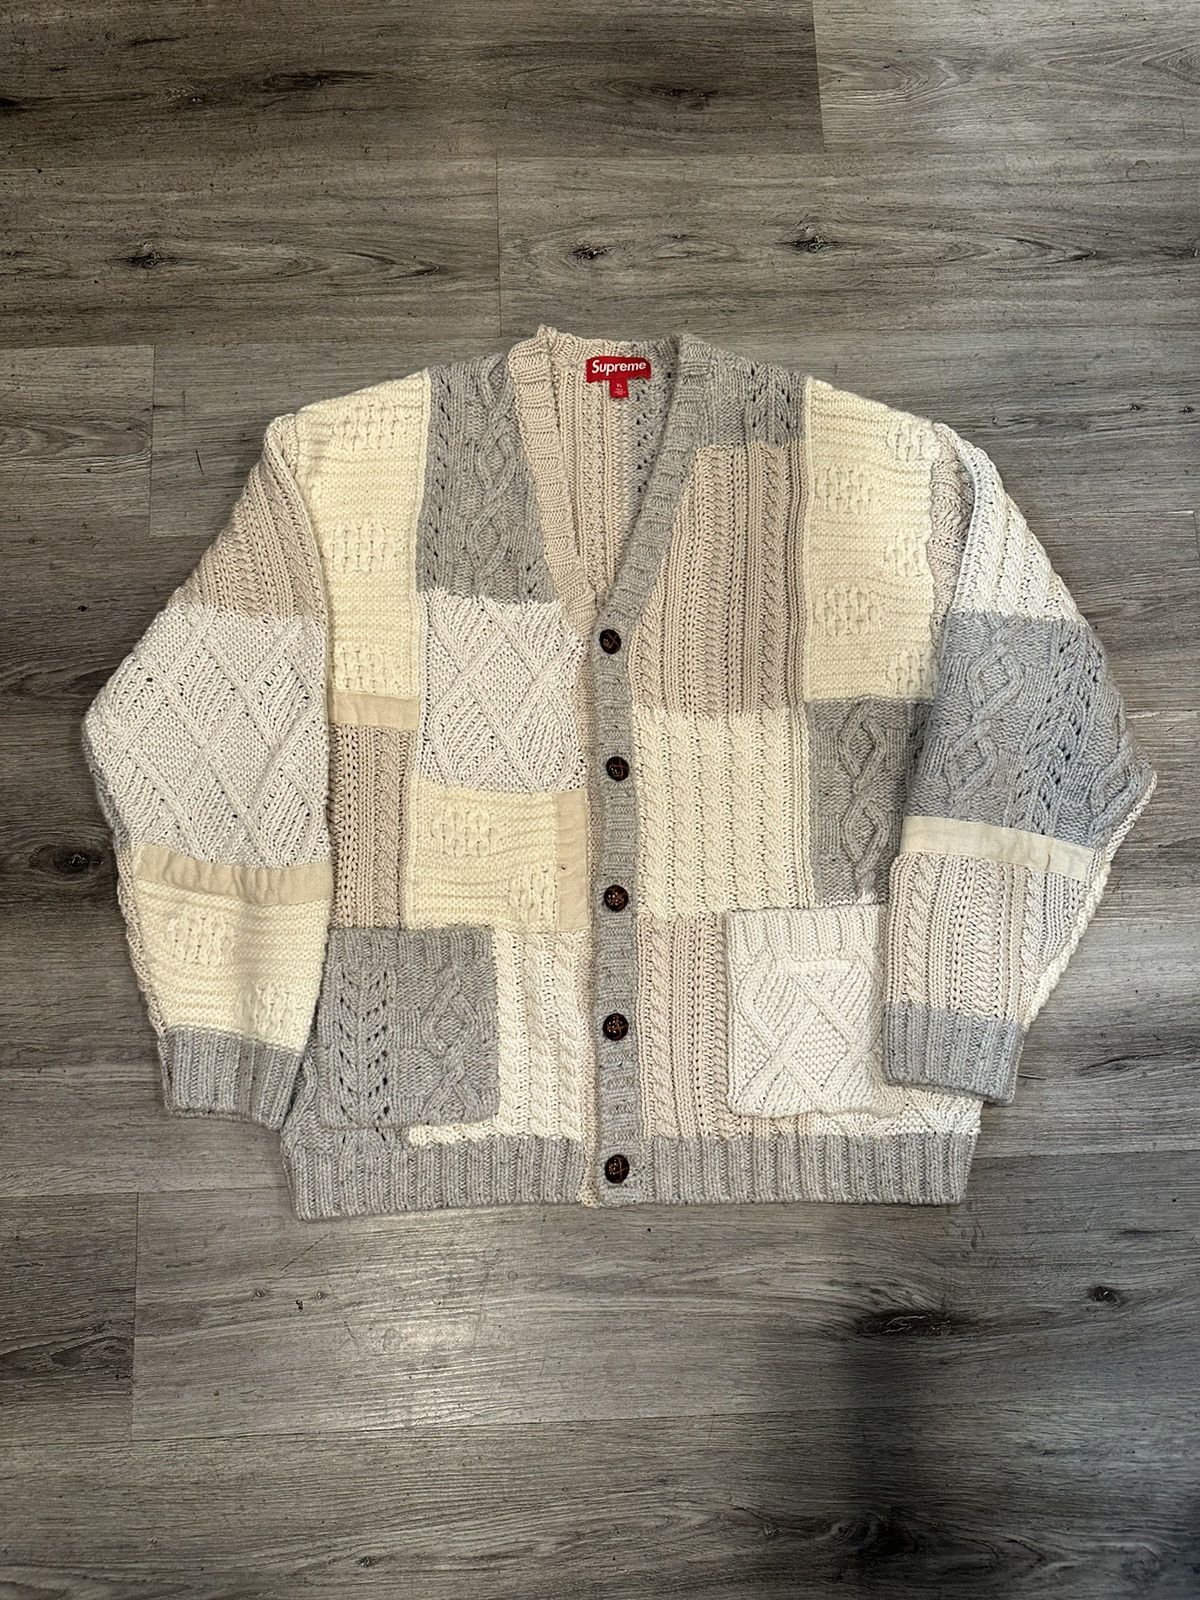 Supreme Supreme patchwork cable knit cardigan | Grailed